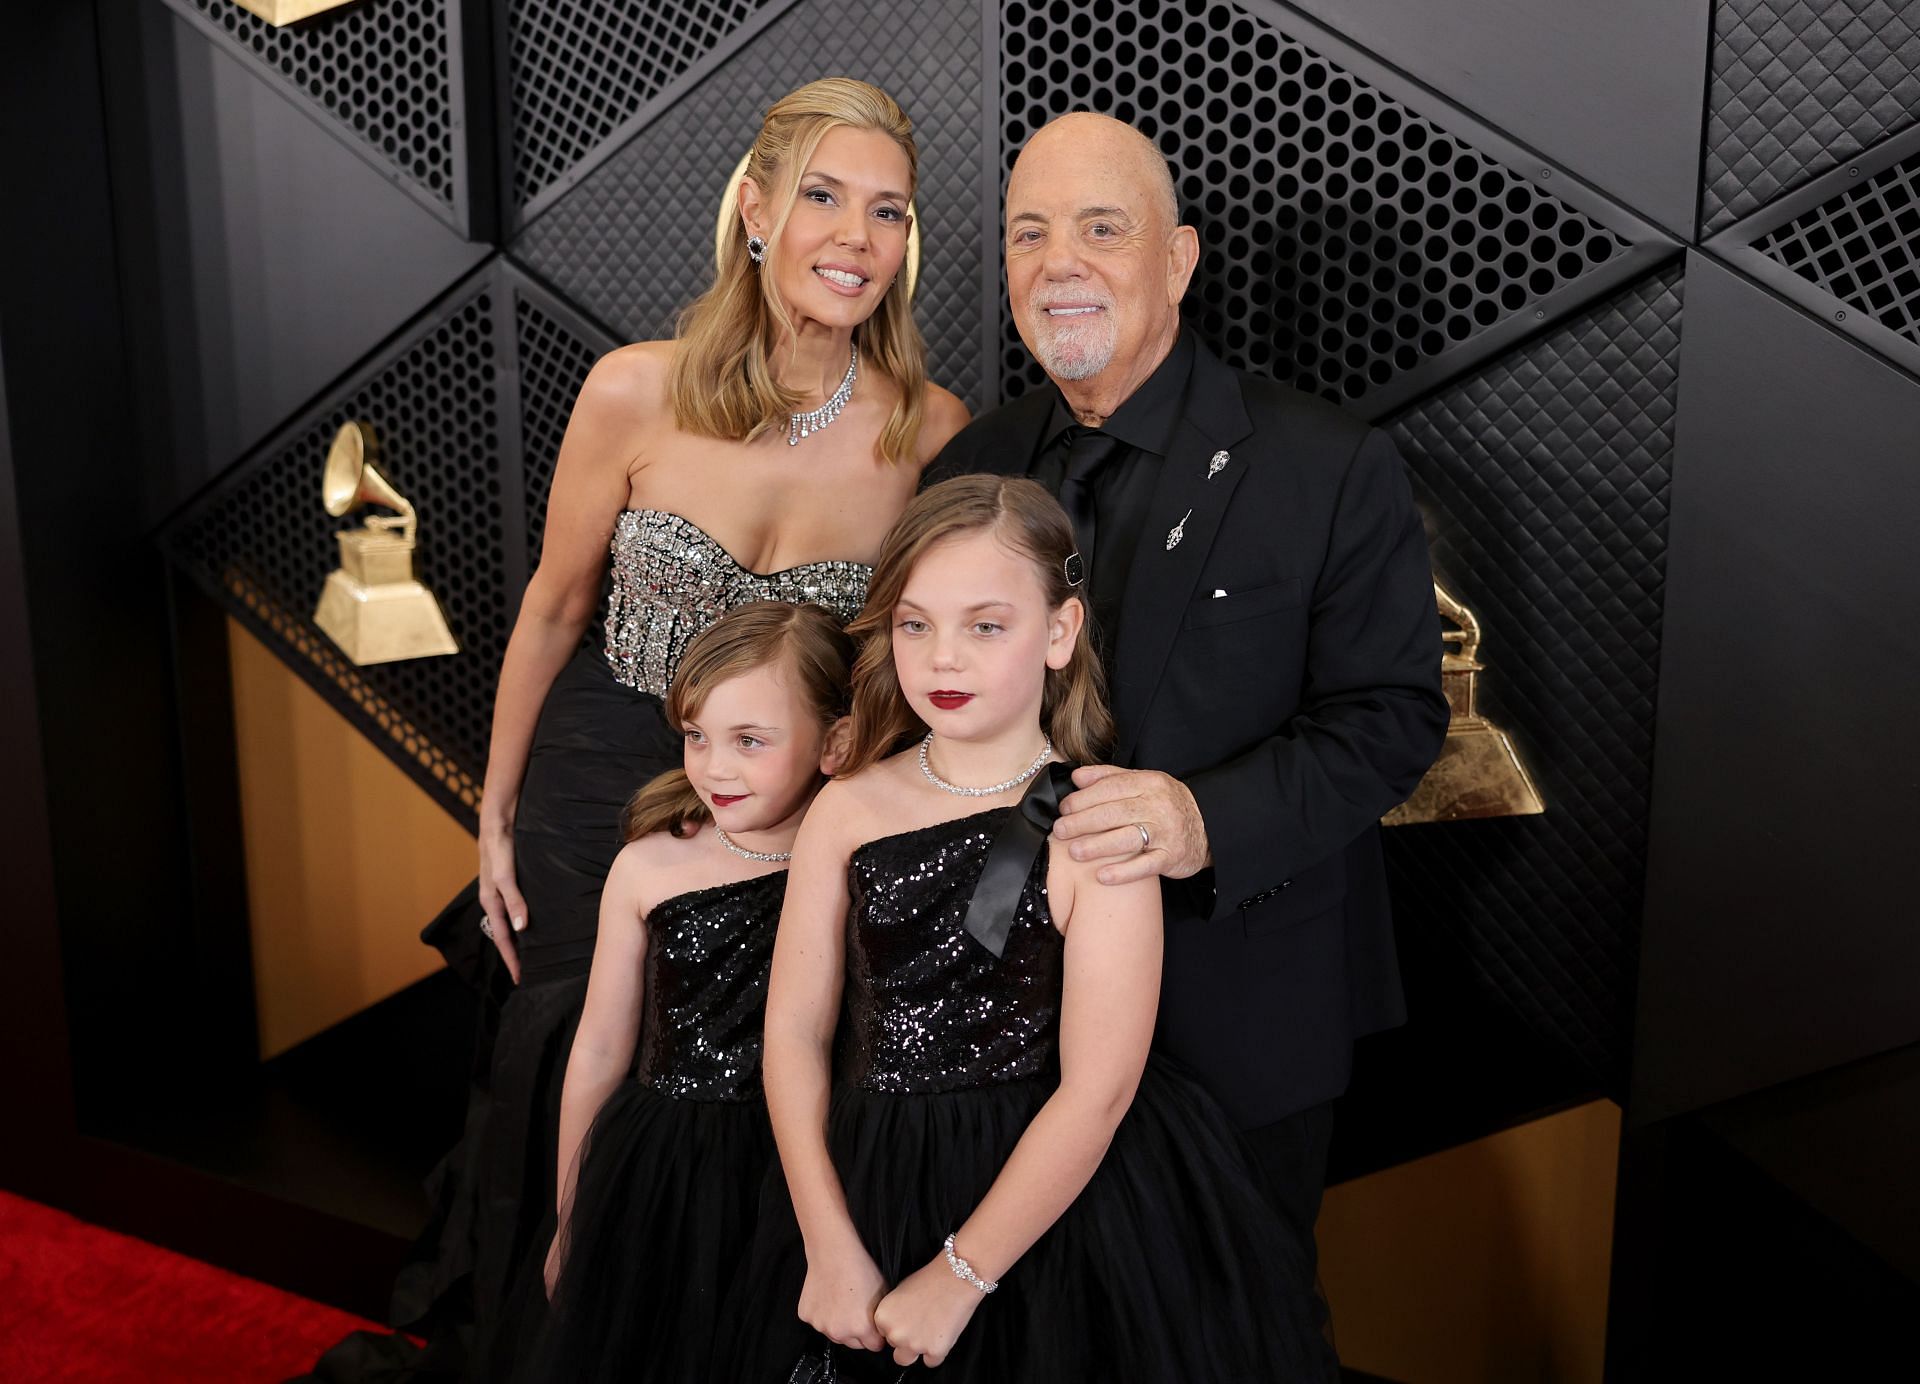 Billy Joel with his family at the Grammys red carpet (Image via Getty Images)